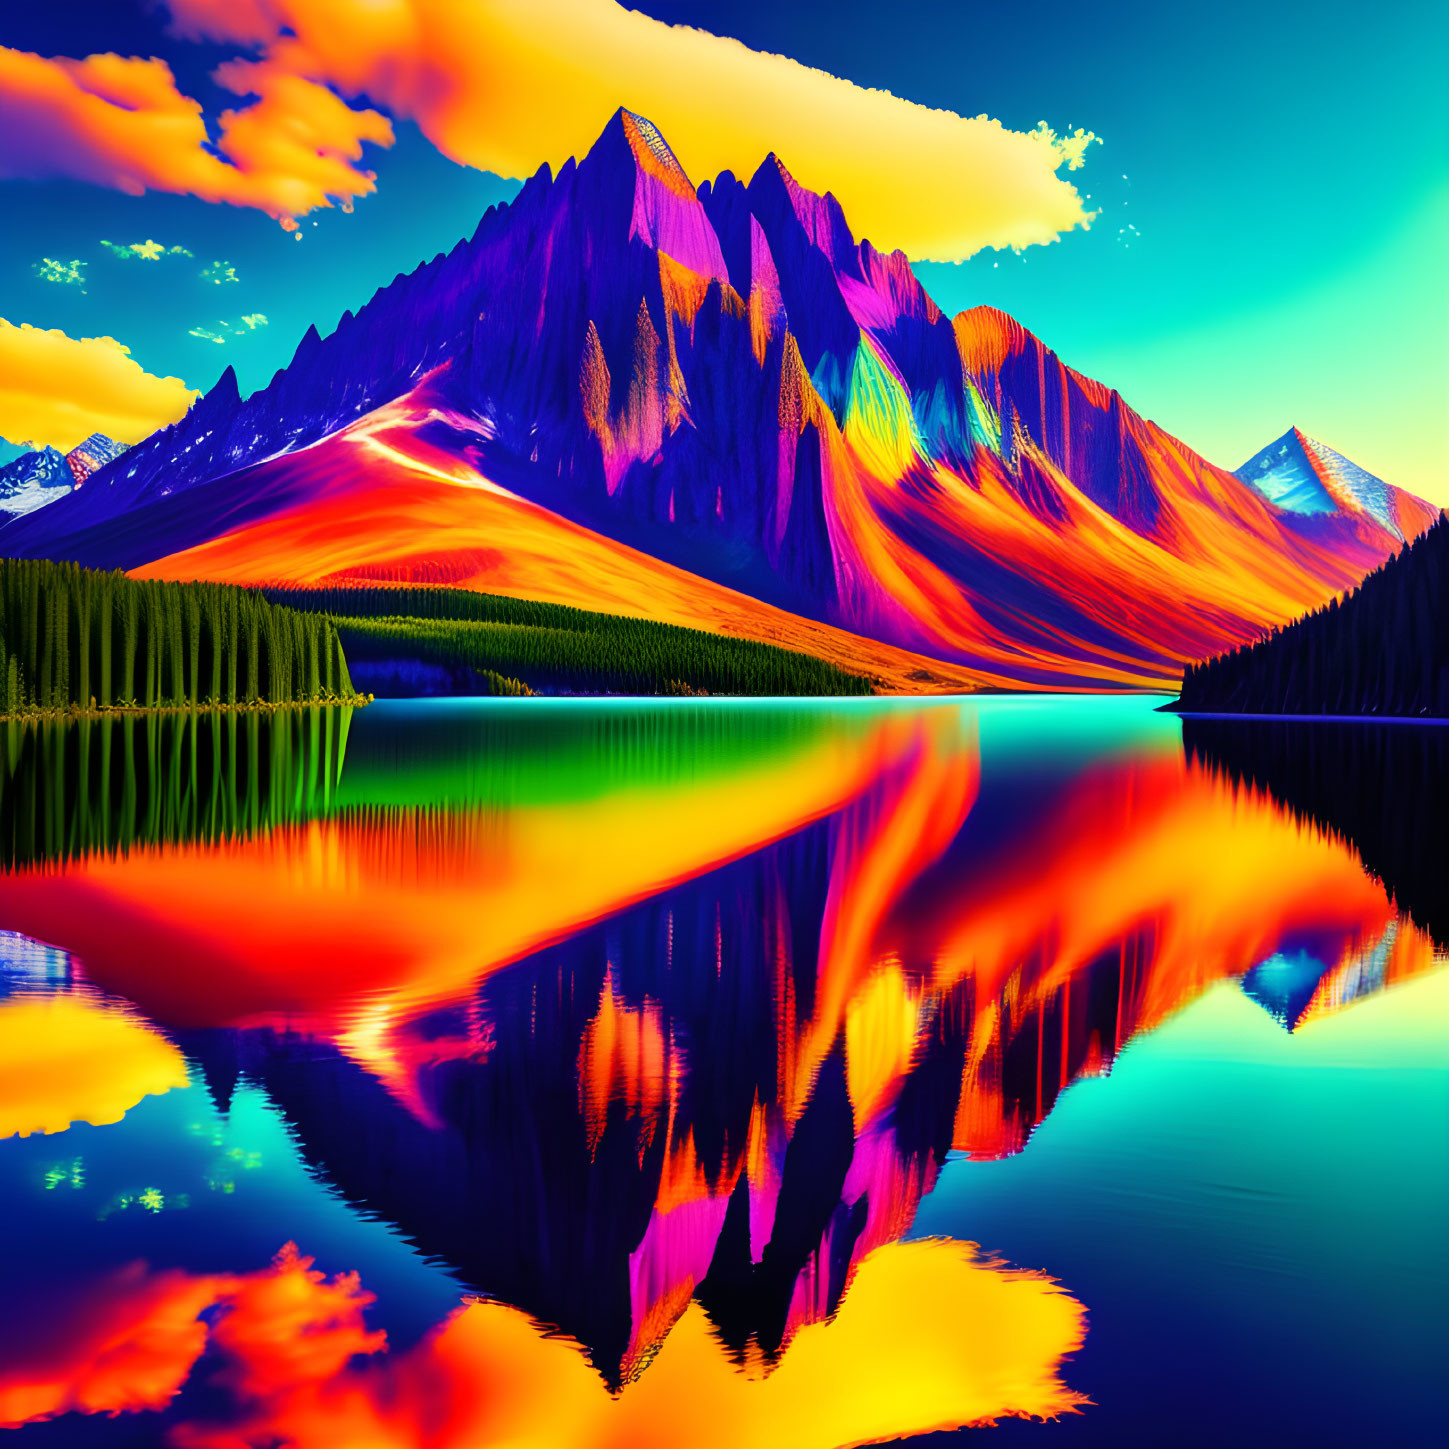 Colorful Psychedelic Landscape with Mirror-Like Lake and Neon-Hued Mountains